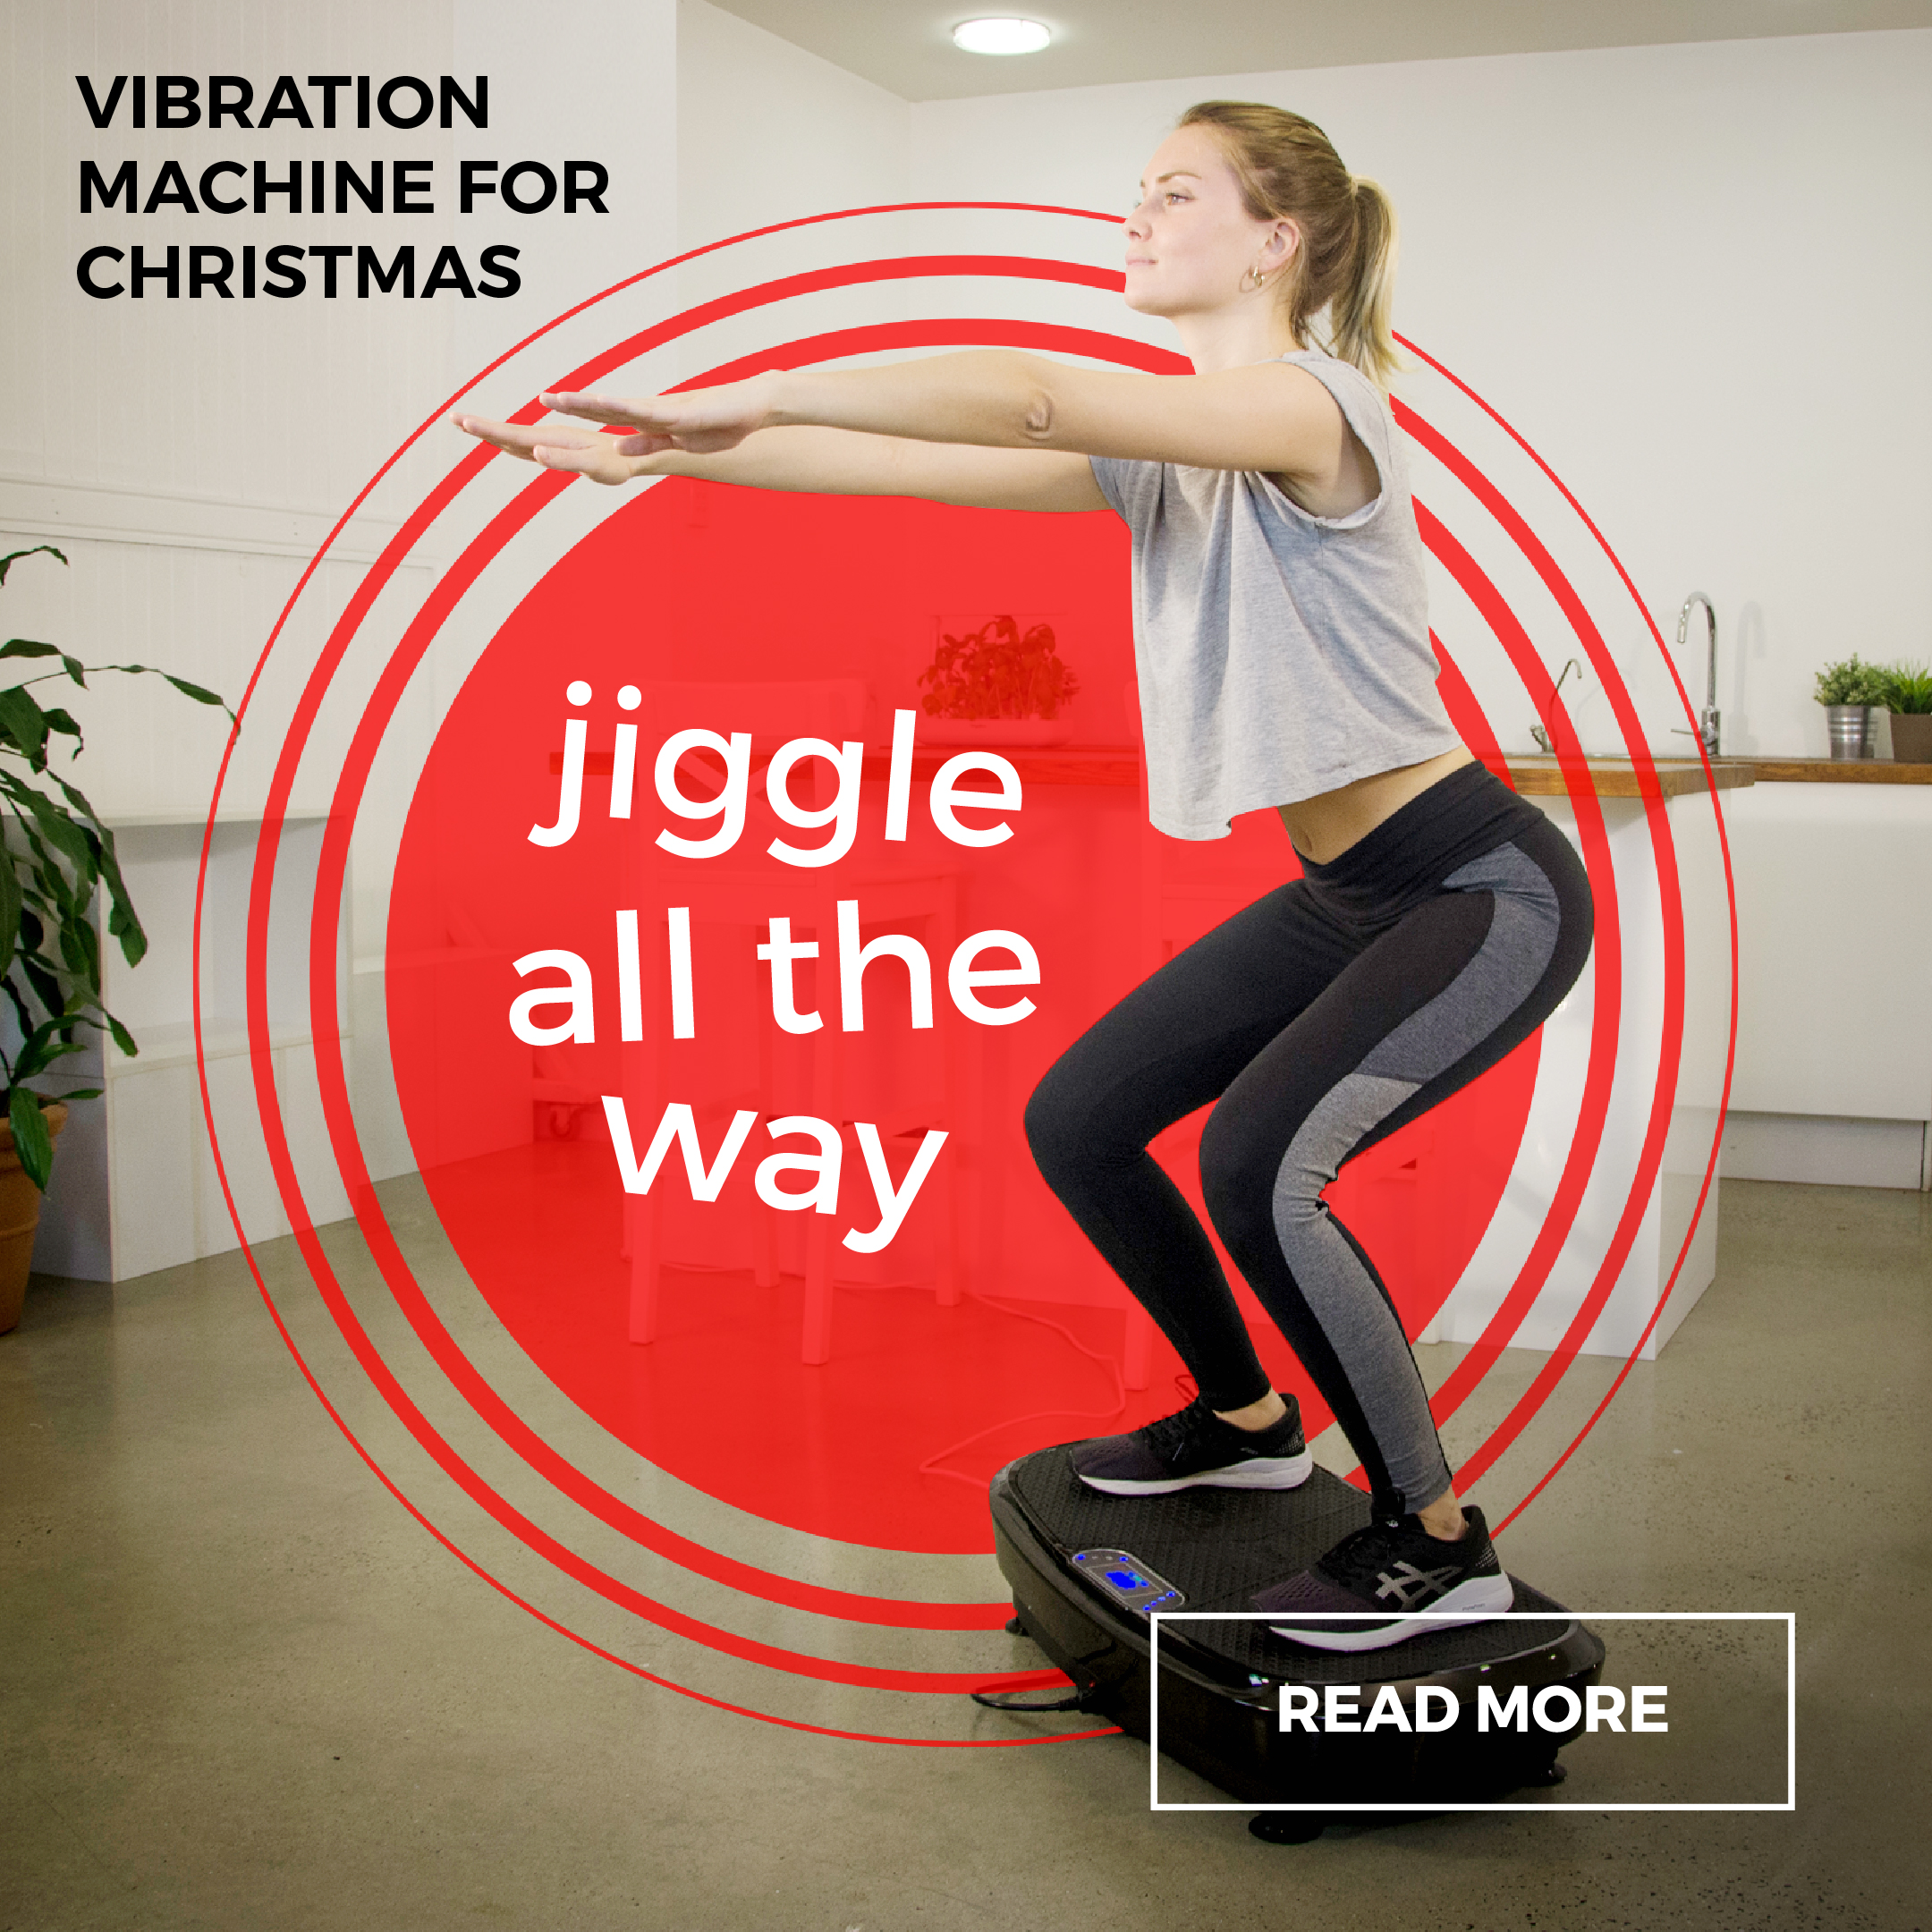 Jiggle all the way with VibroSlim this Xmas